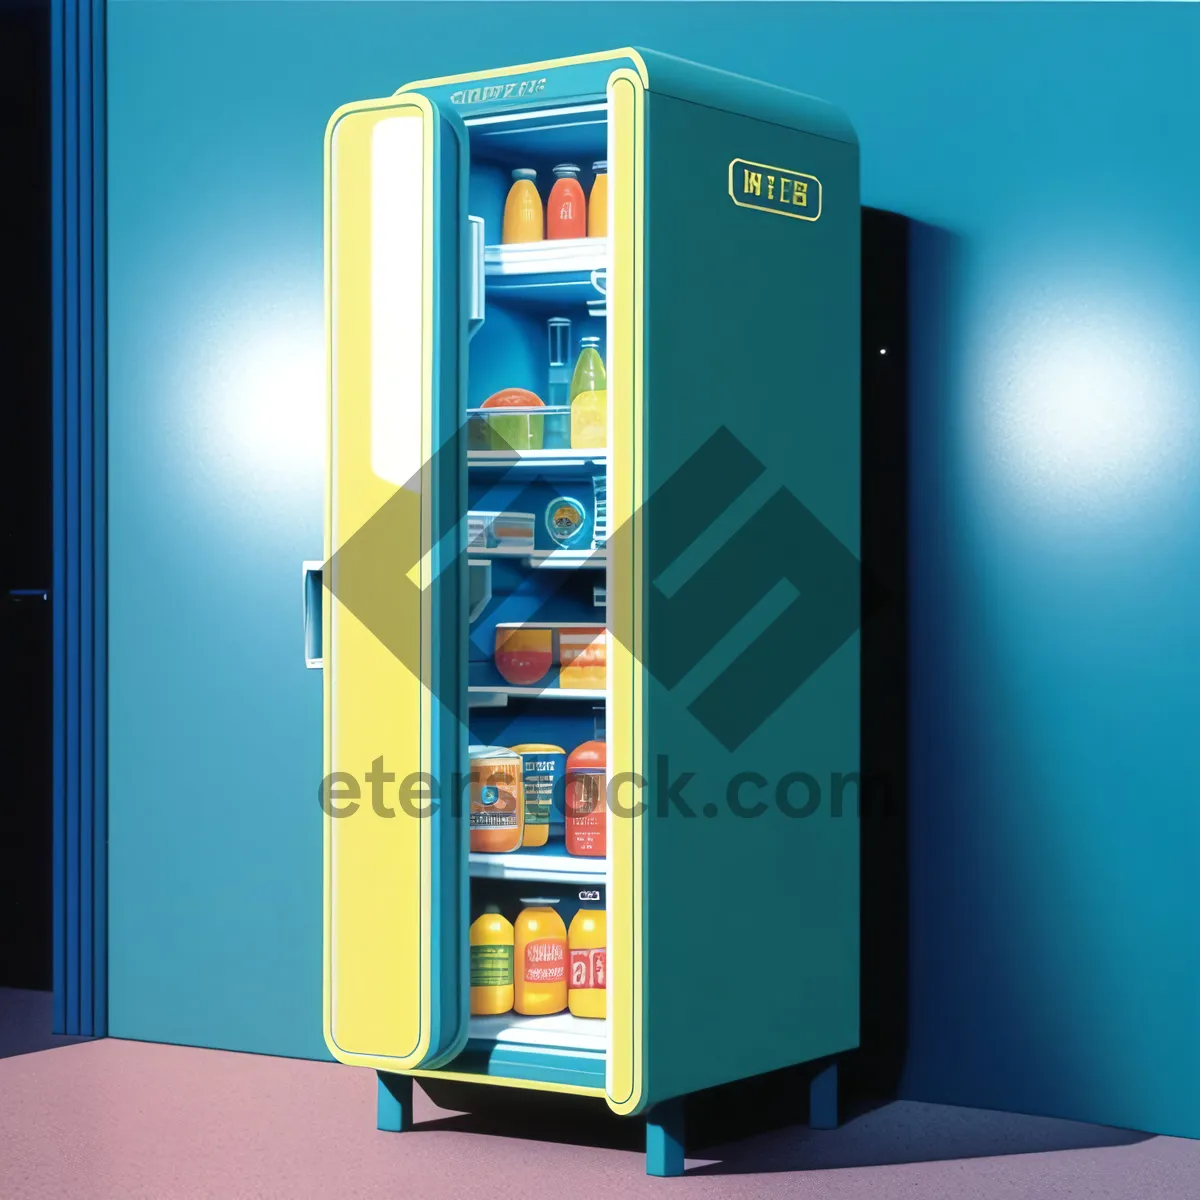 Picture of High-Tech Vending Locker for Cash and Calls